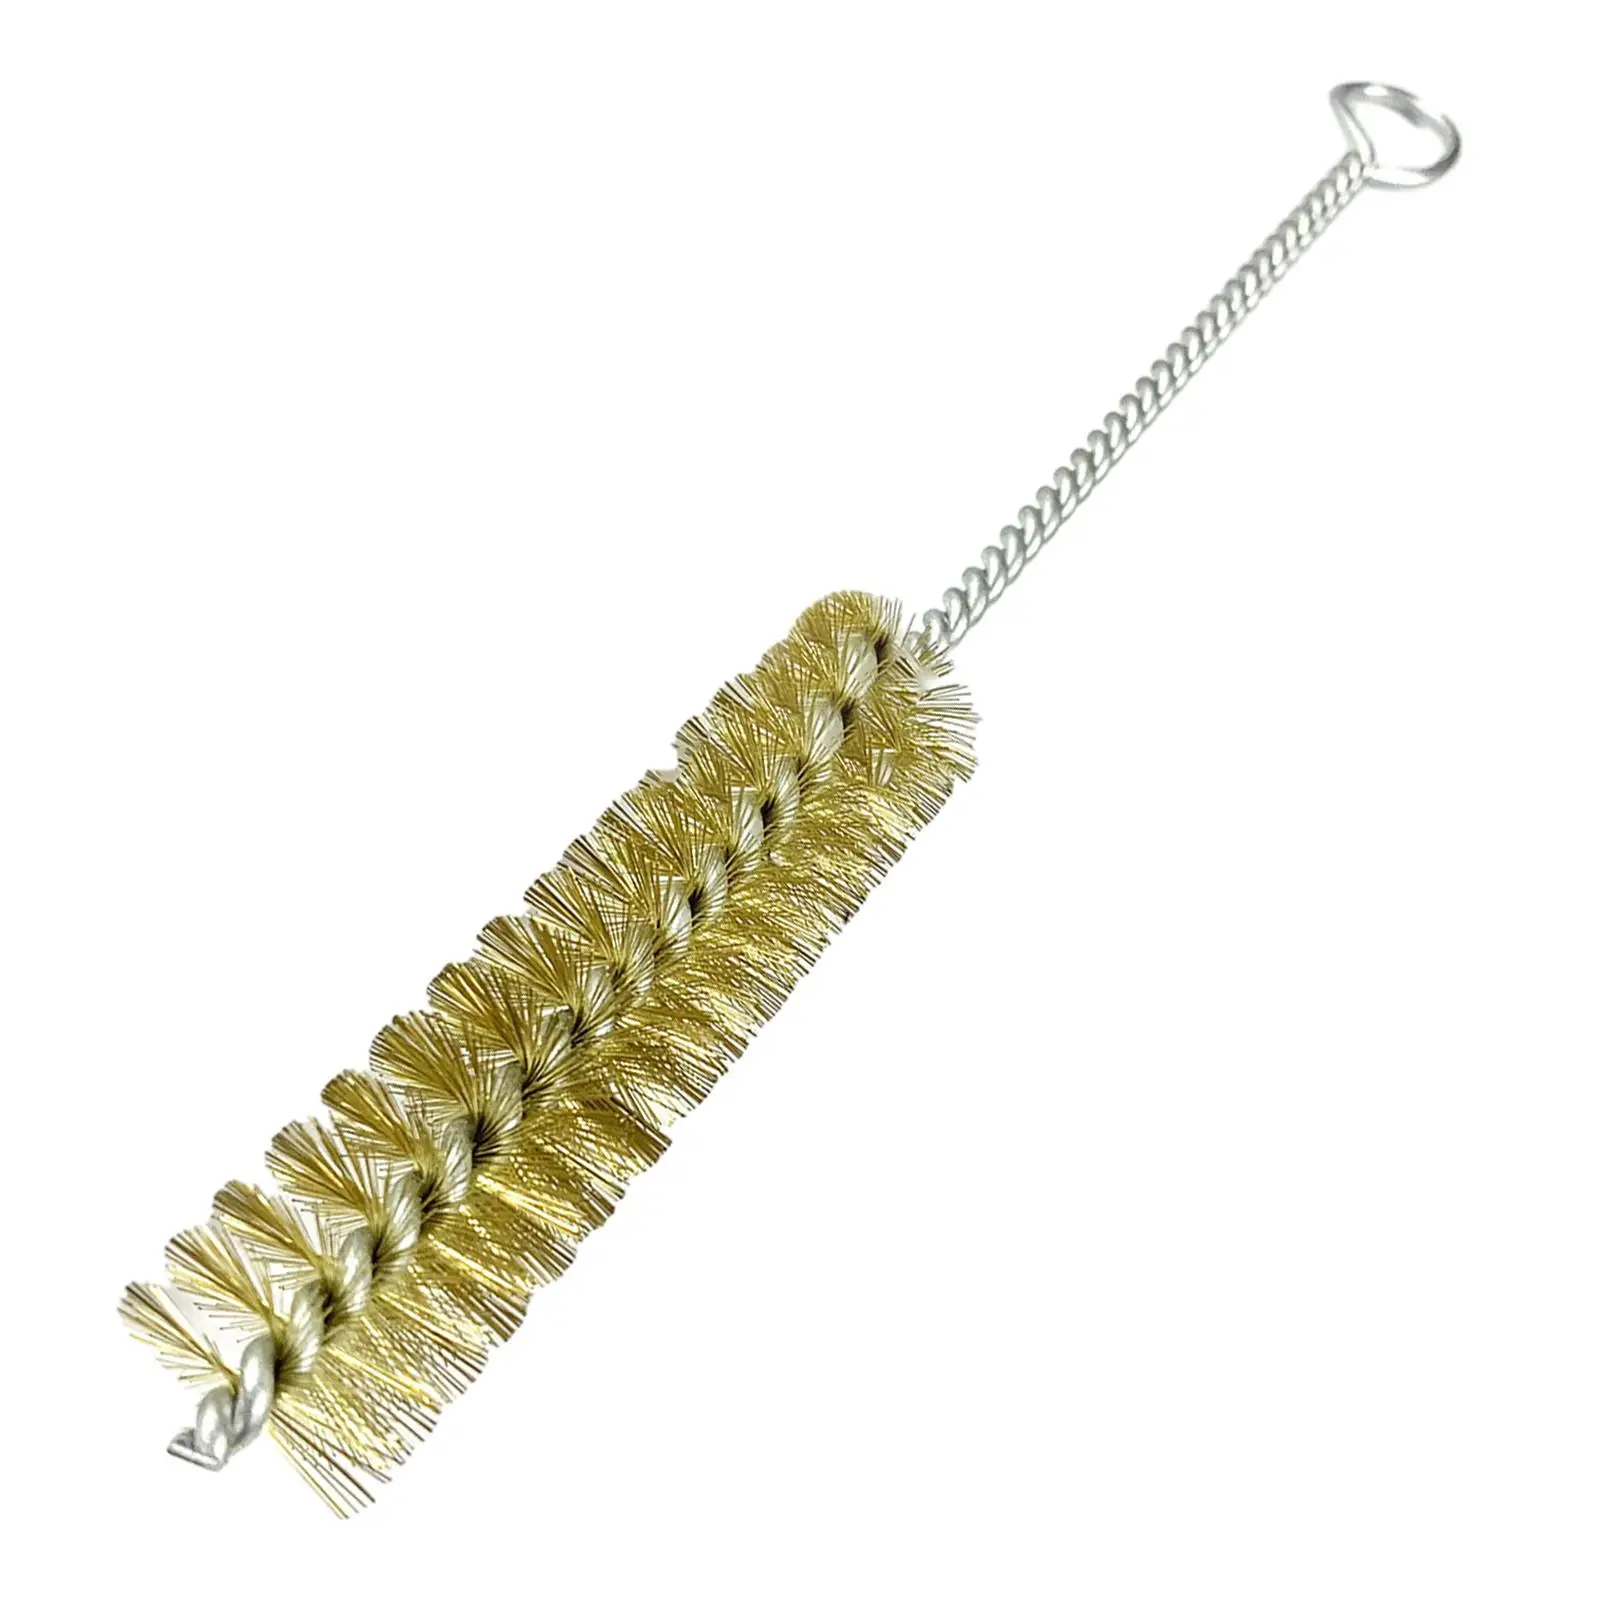 Brass Brush Remove Rust Paint Remover Long Handle Pipe Cleaning Brush Stainless Steel Bore Brush Bristles Wire Brush for Auto